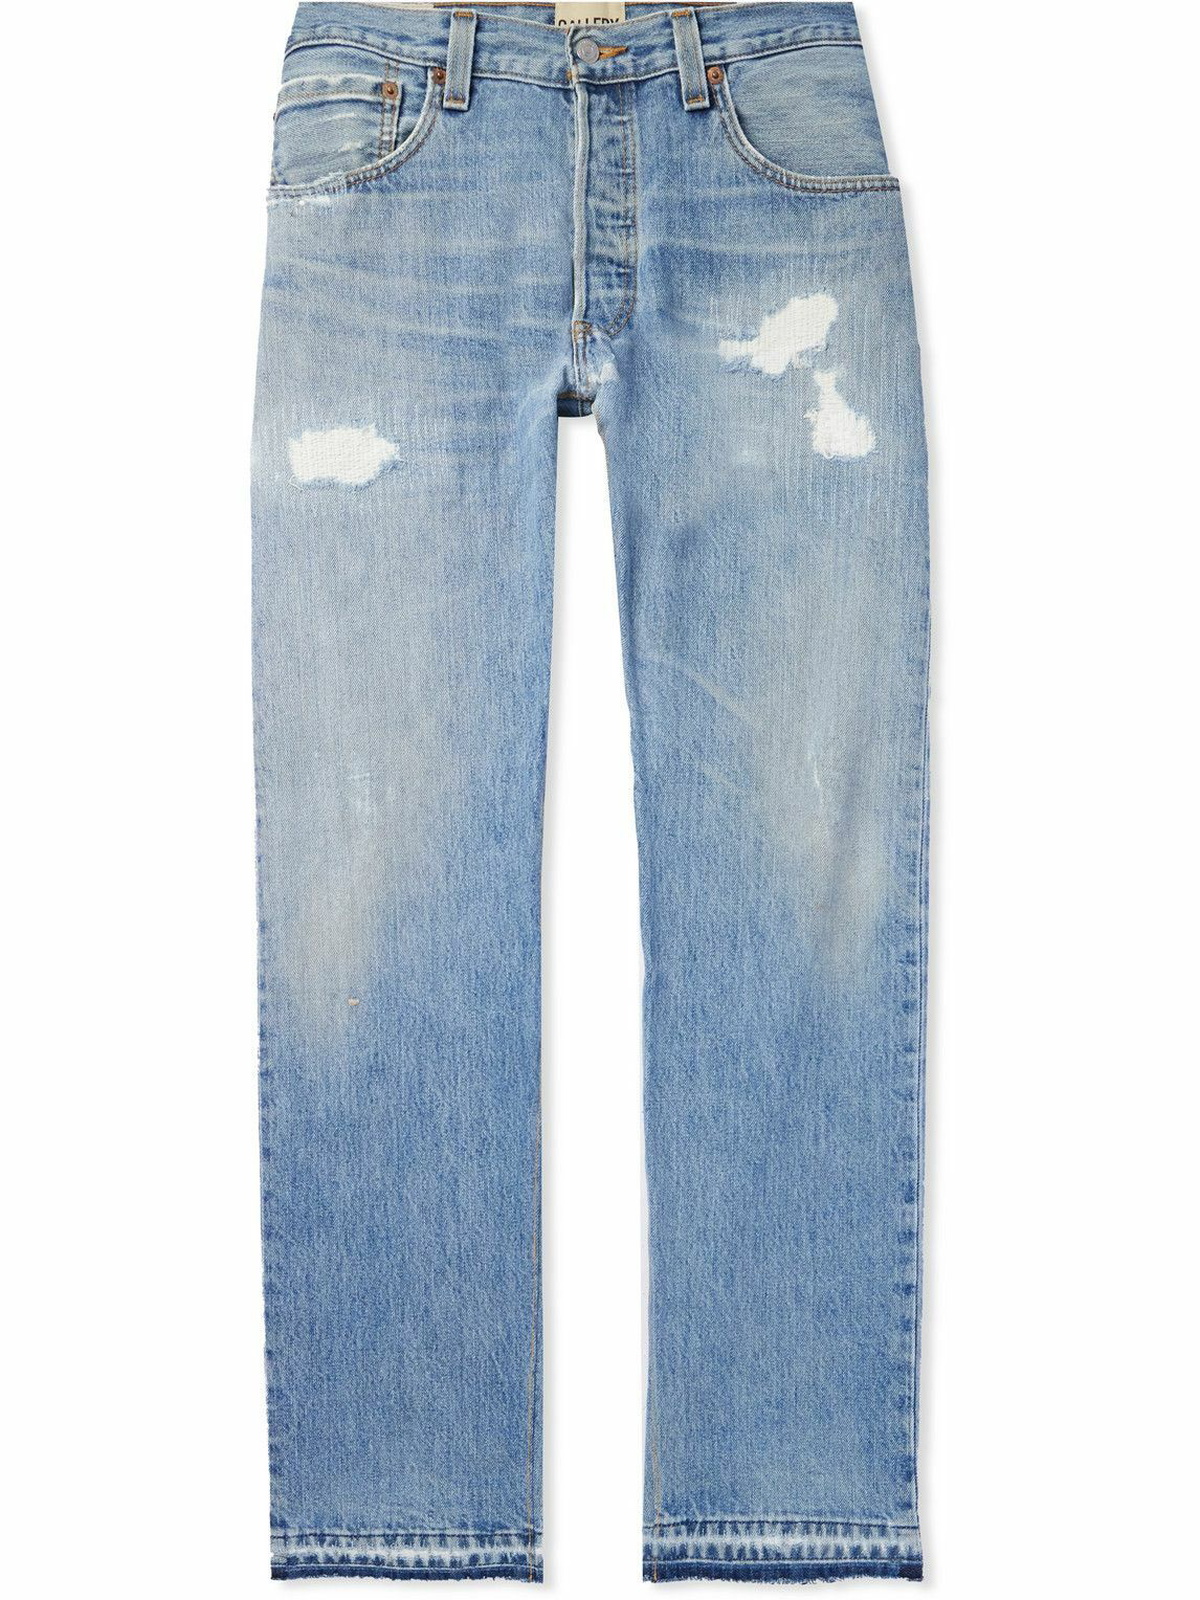 Gallery Dept. - Straight-Leg Distressed Jeans - Blue Gallery Dept.